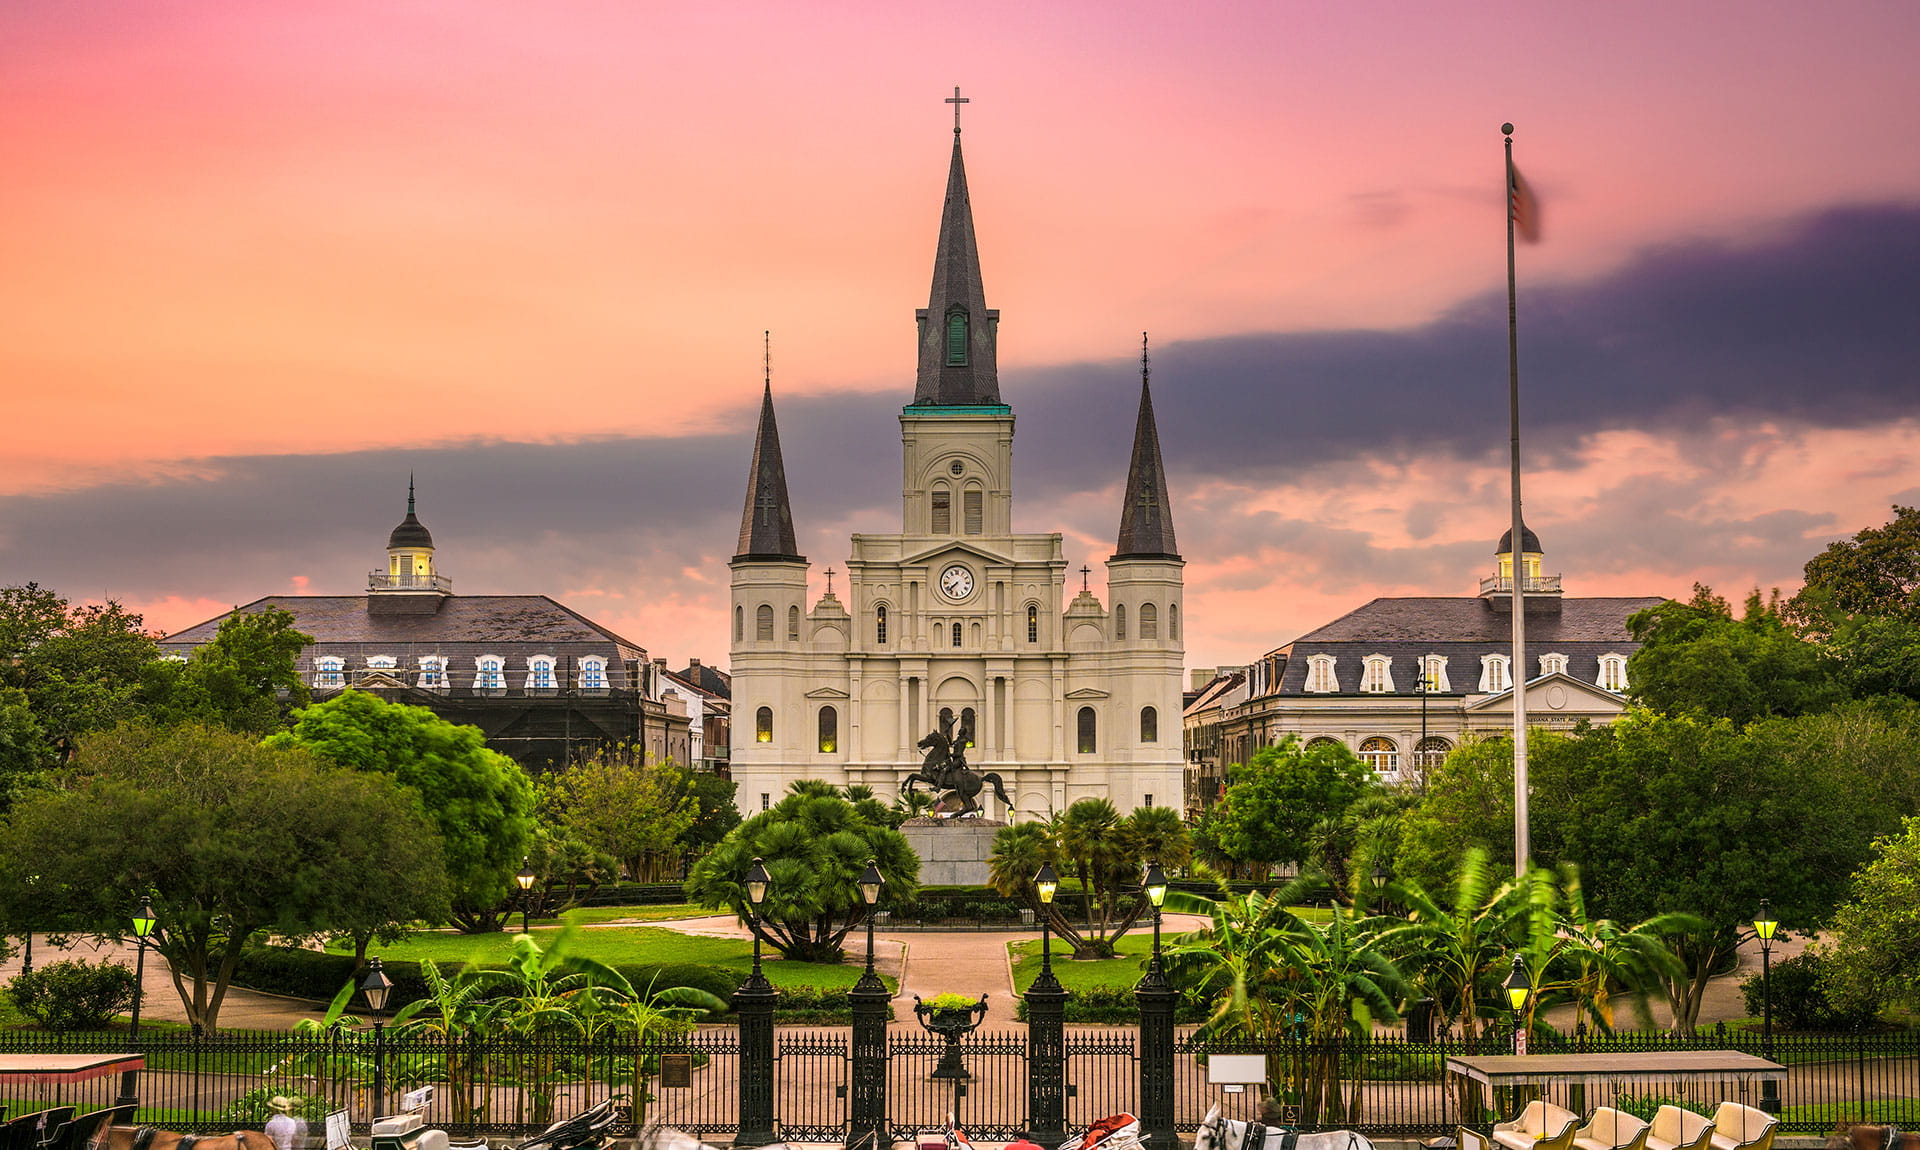 Jackson Square, New Orleans during Sunset